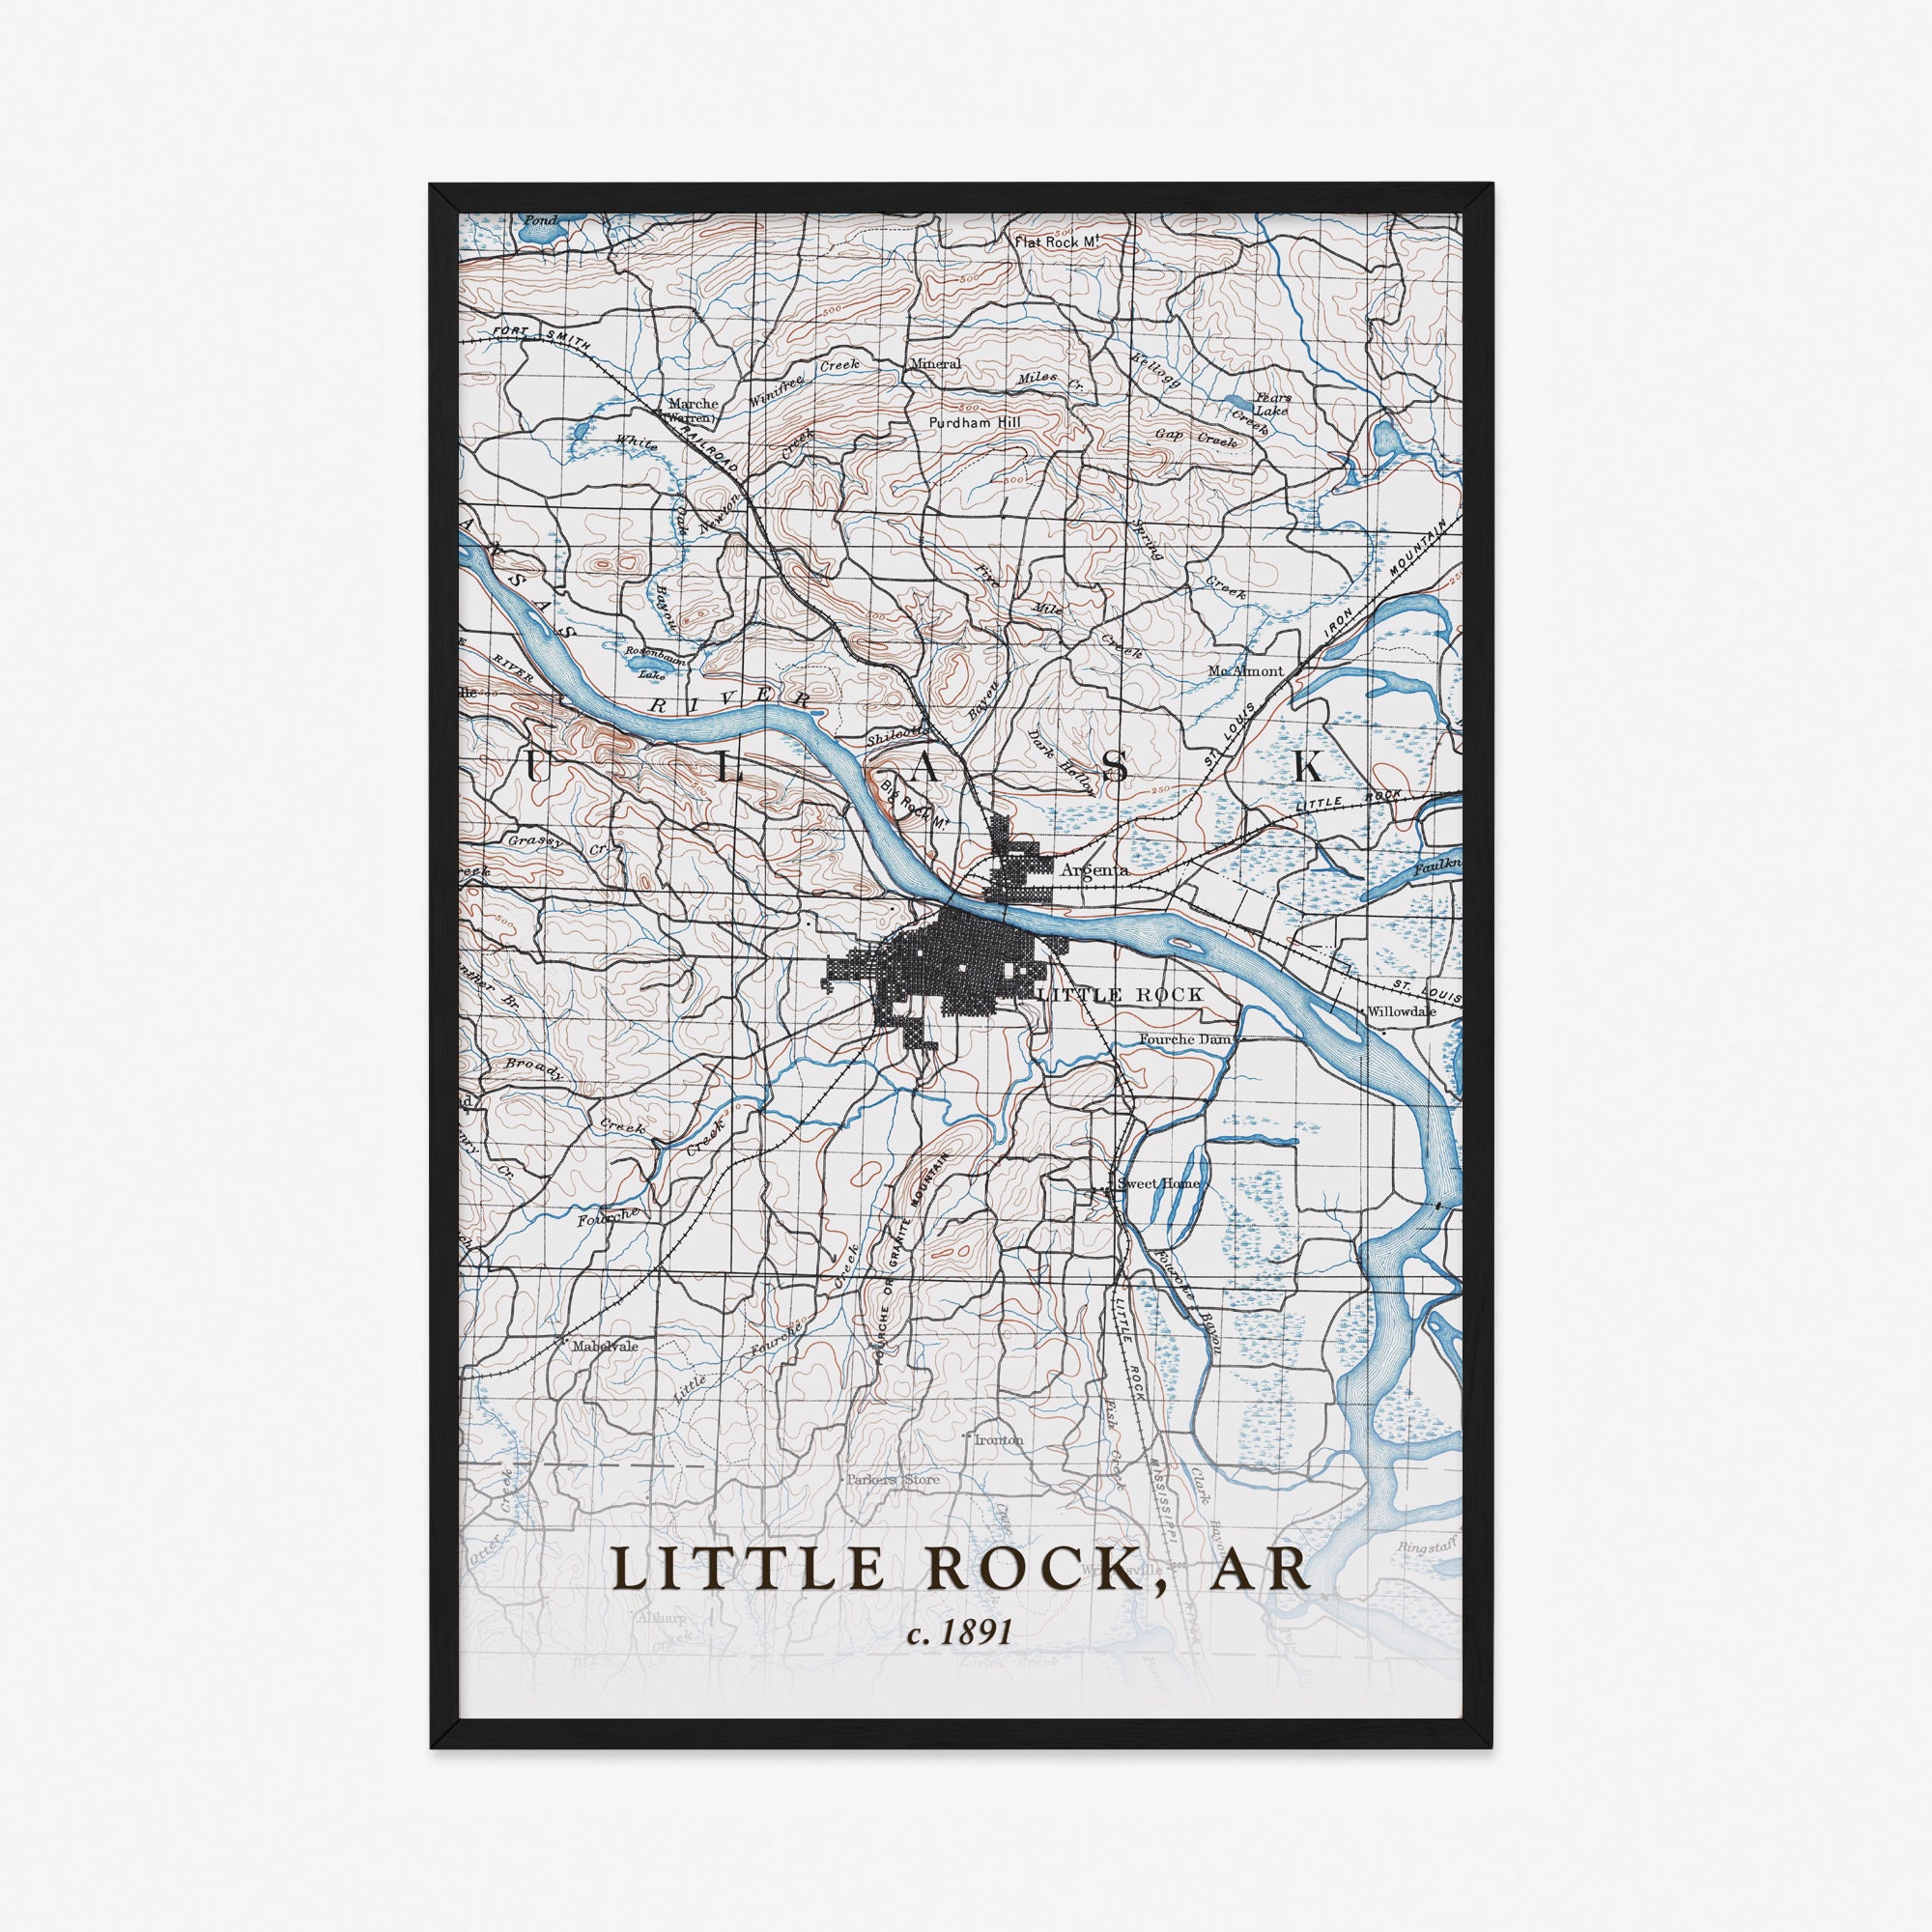 Little Rock, AR - 1891 Topographic Map